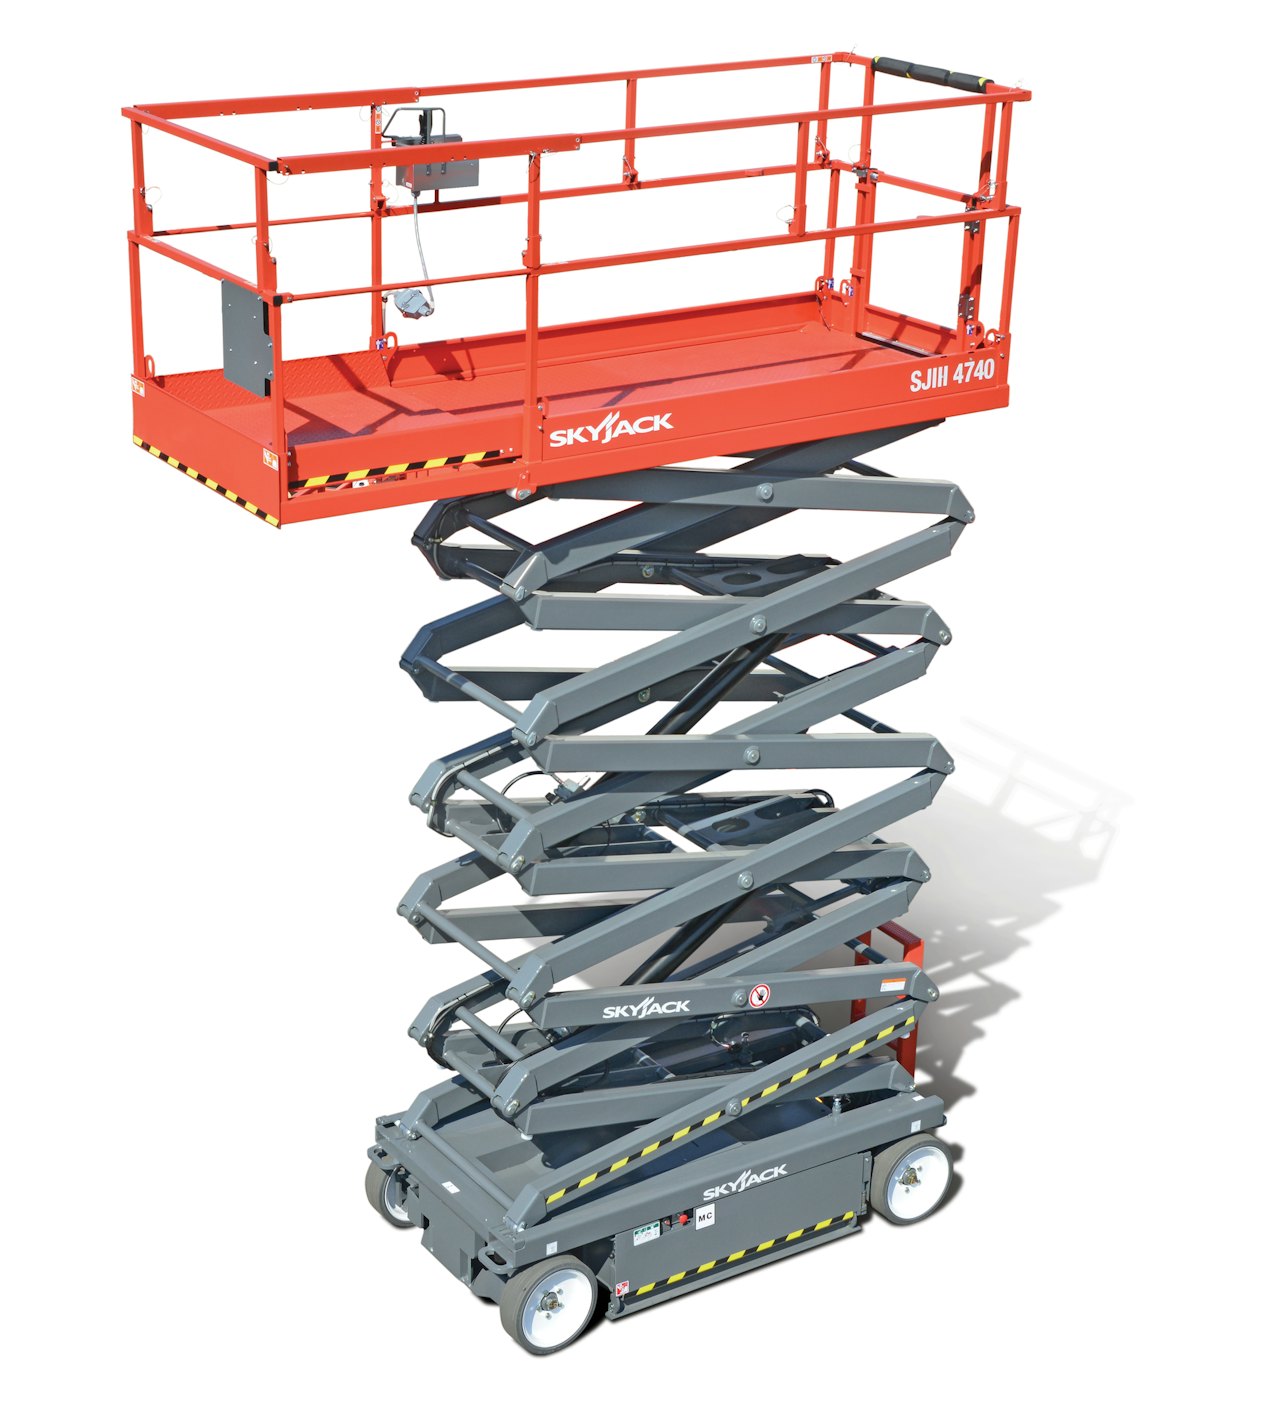 CDC Electrical - High-level access is not a problem for our team of Ipaf  approved electricians, This skyjack scissor lift was the perfect solution  for accessing the high-level power tray. 🏗 #cdcelectrical #